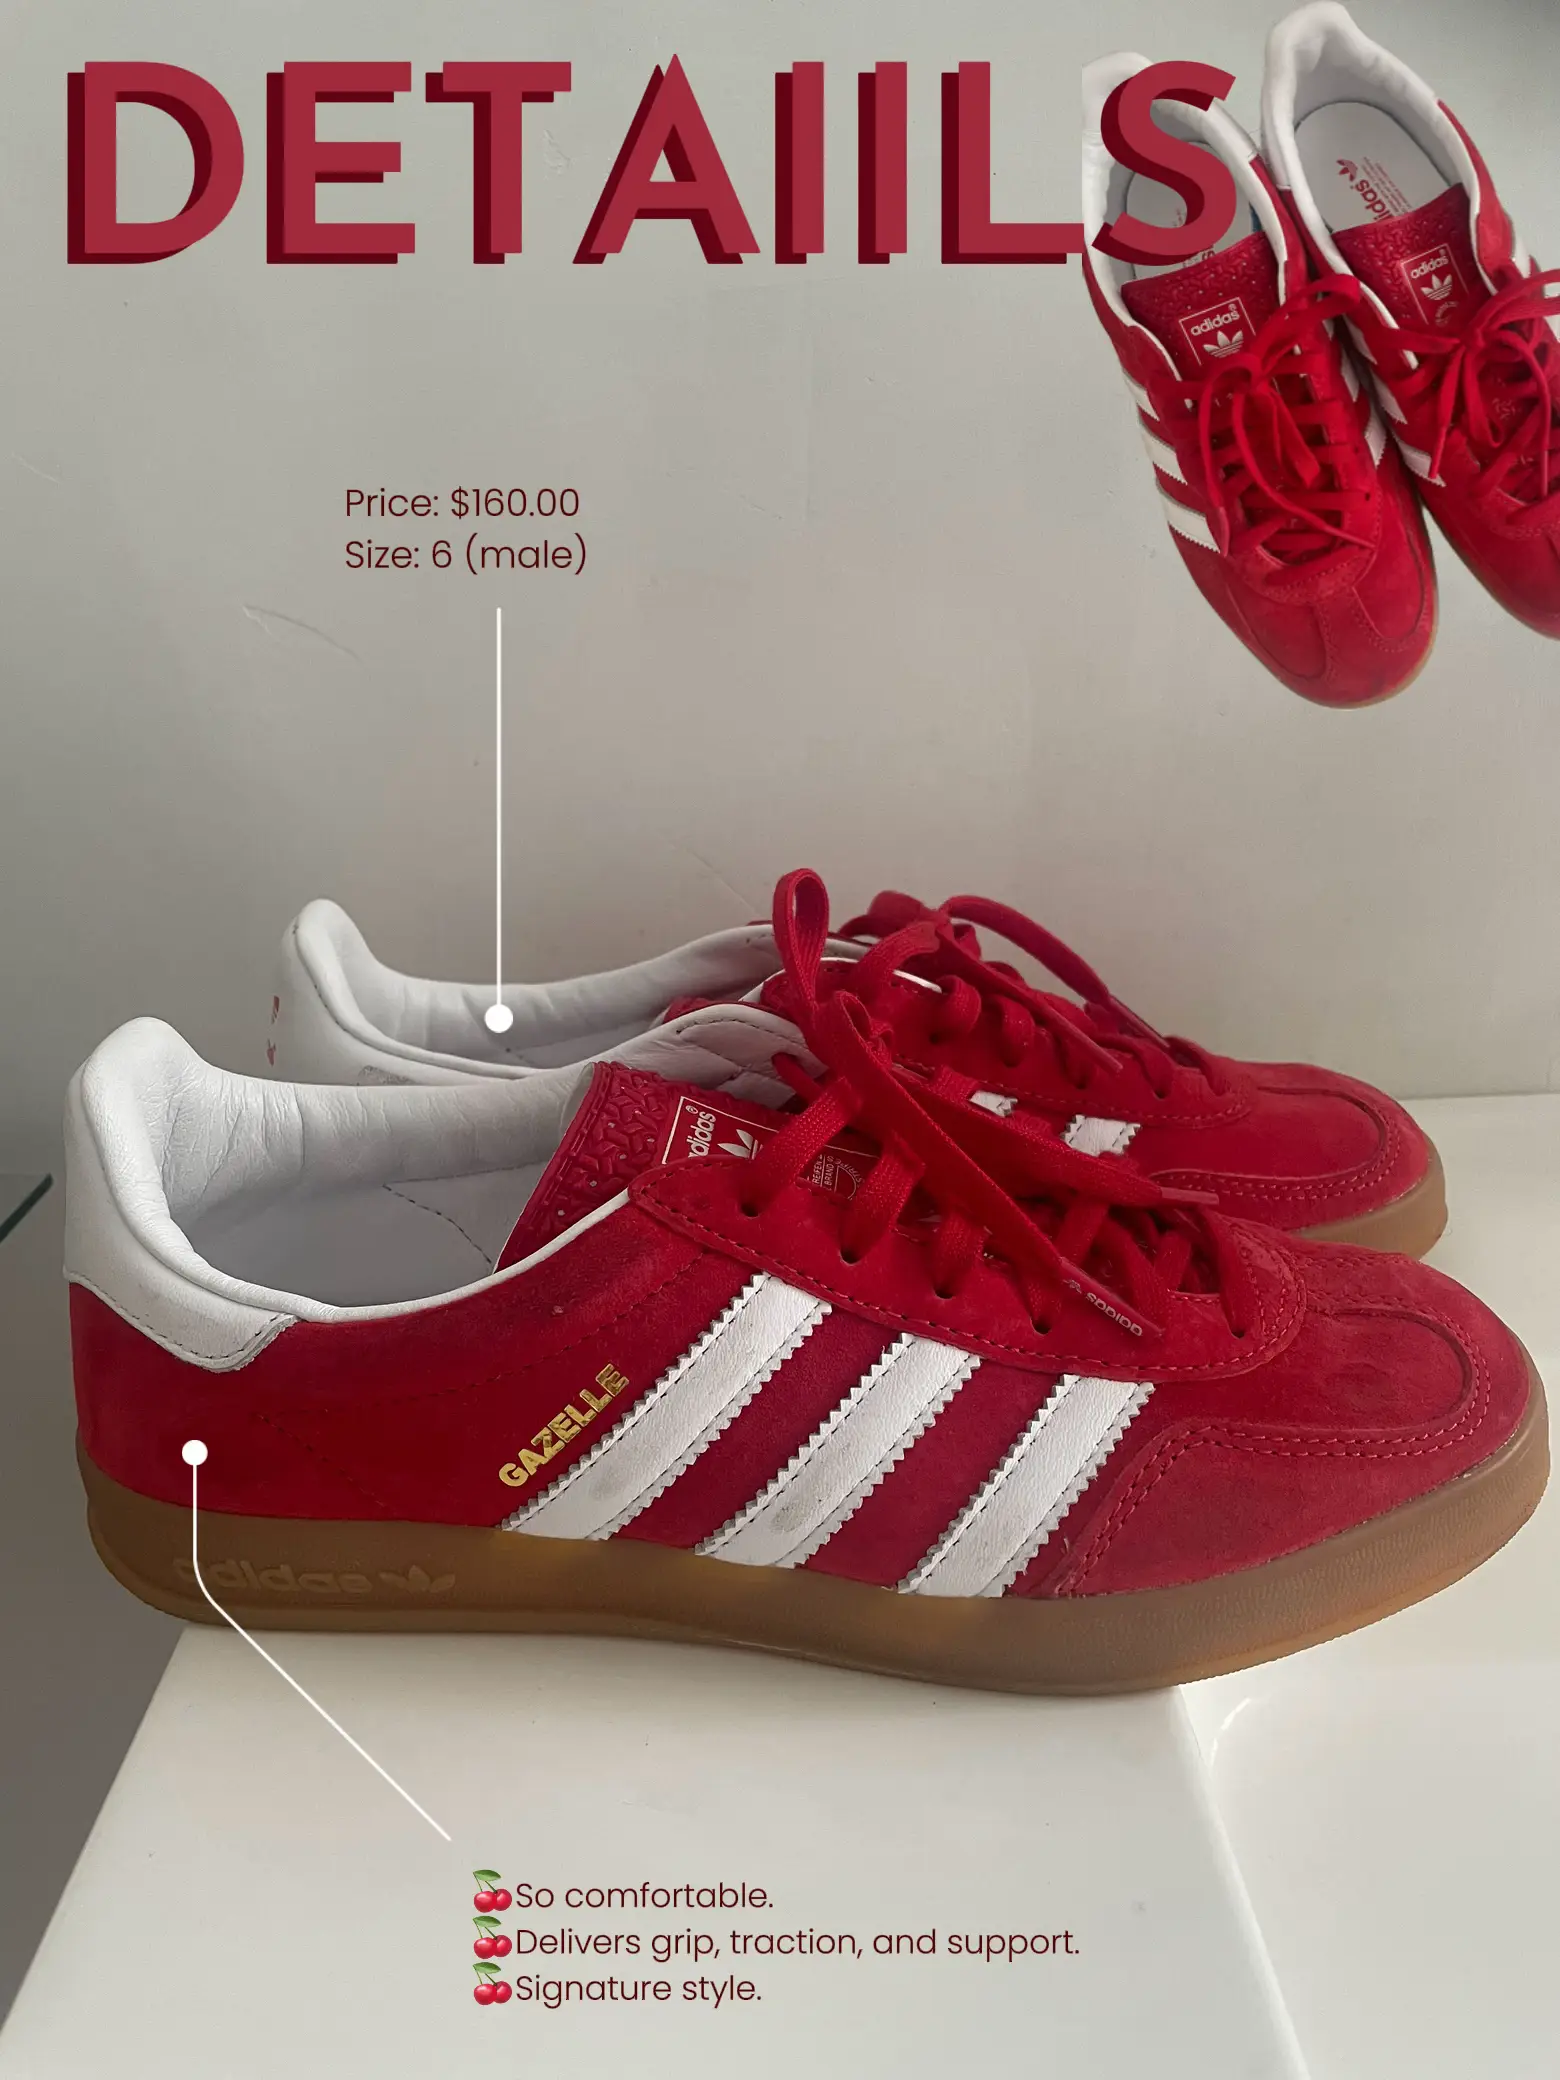 new gazelle indoor🧡  Adidas outfit shoes, Red adidas shoes, Red sneakers